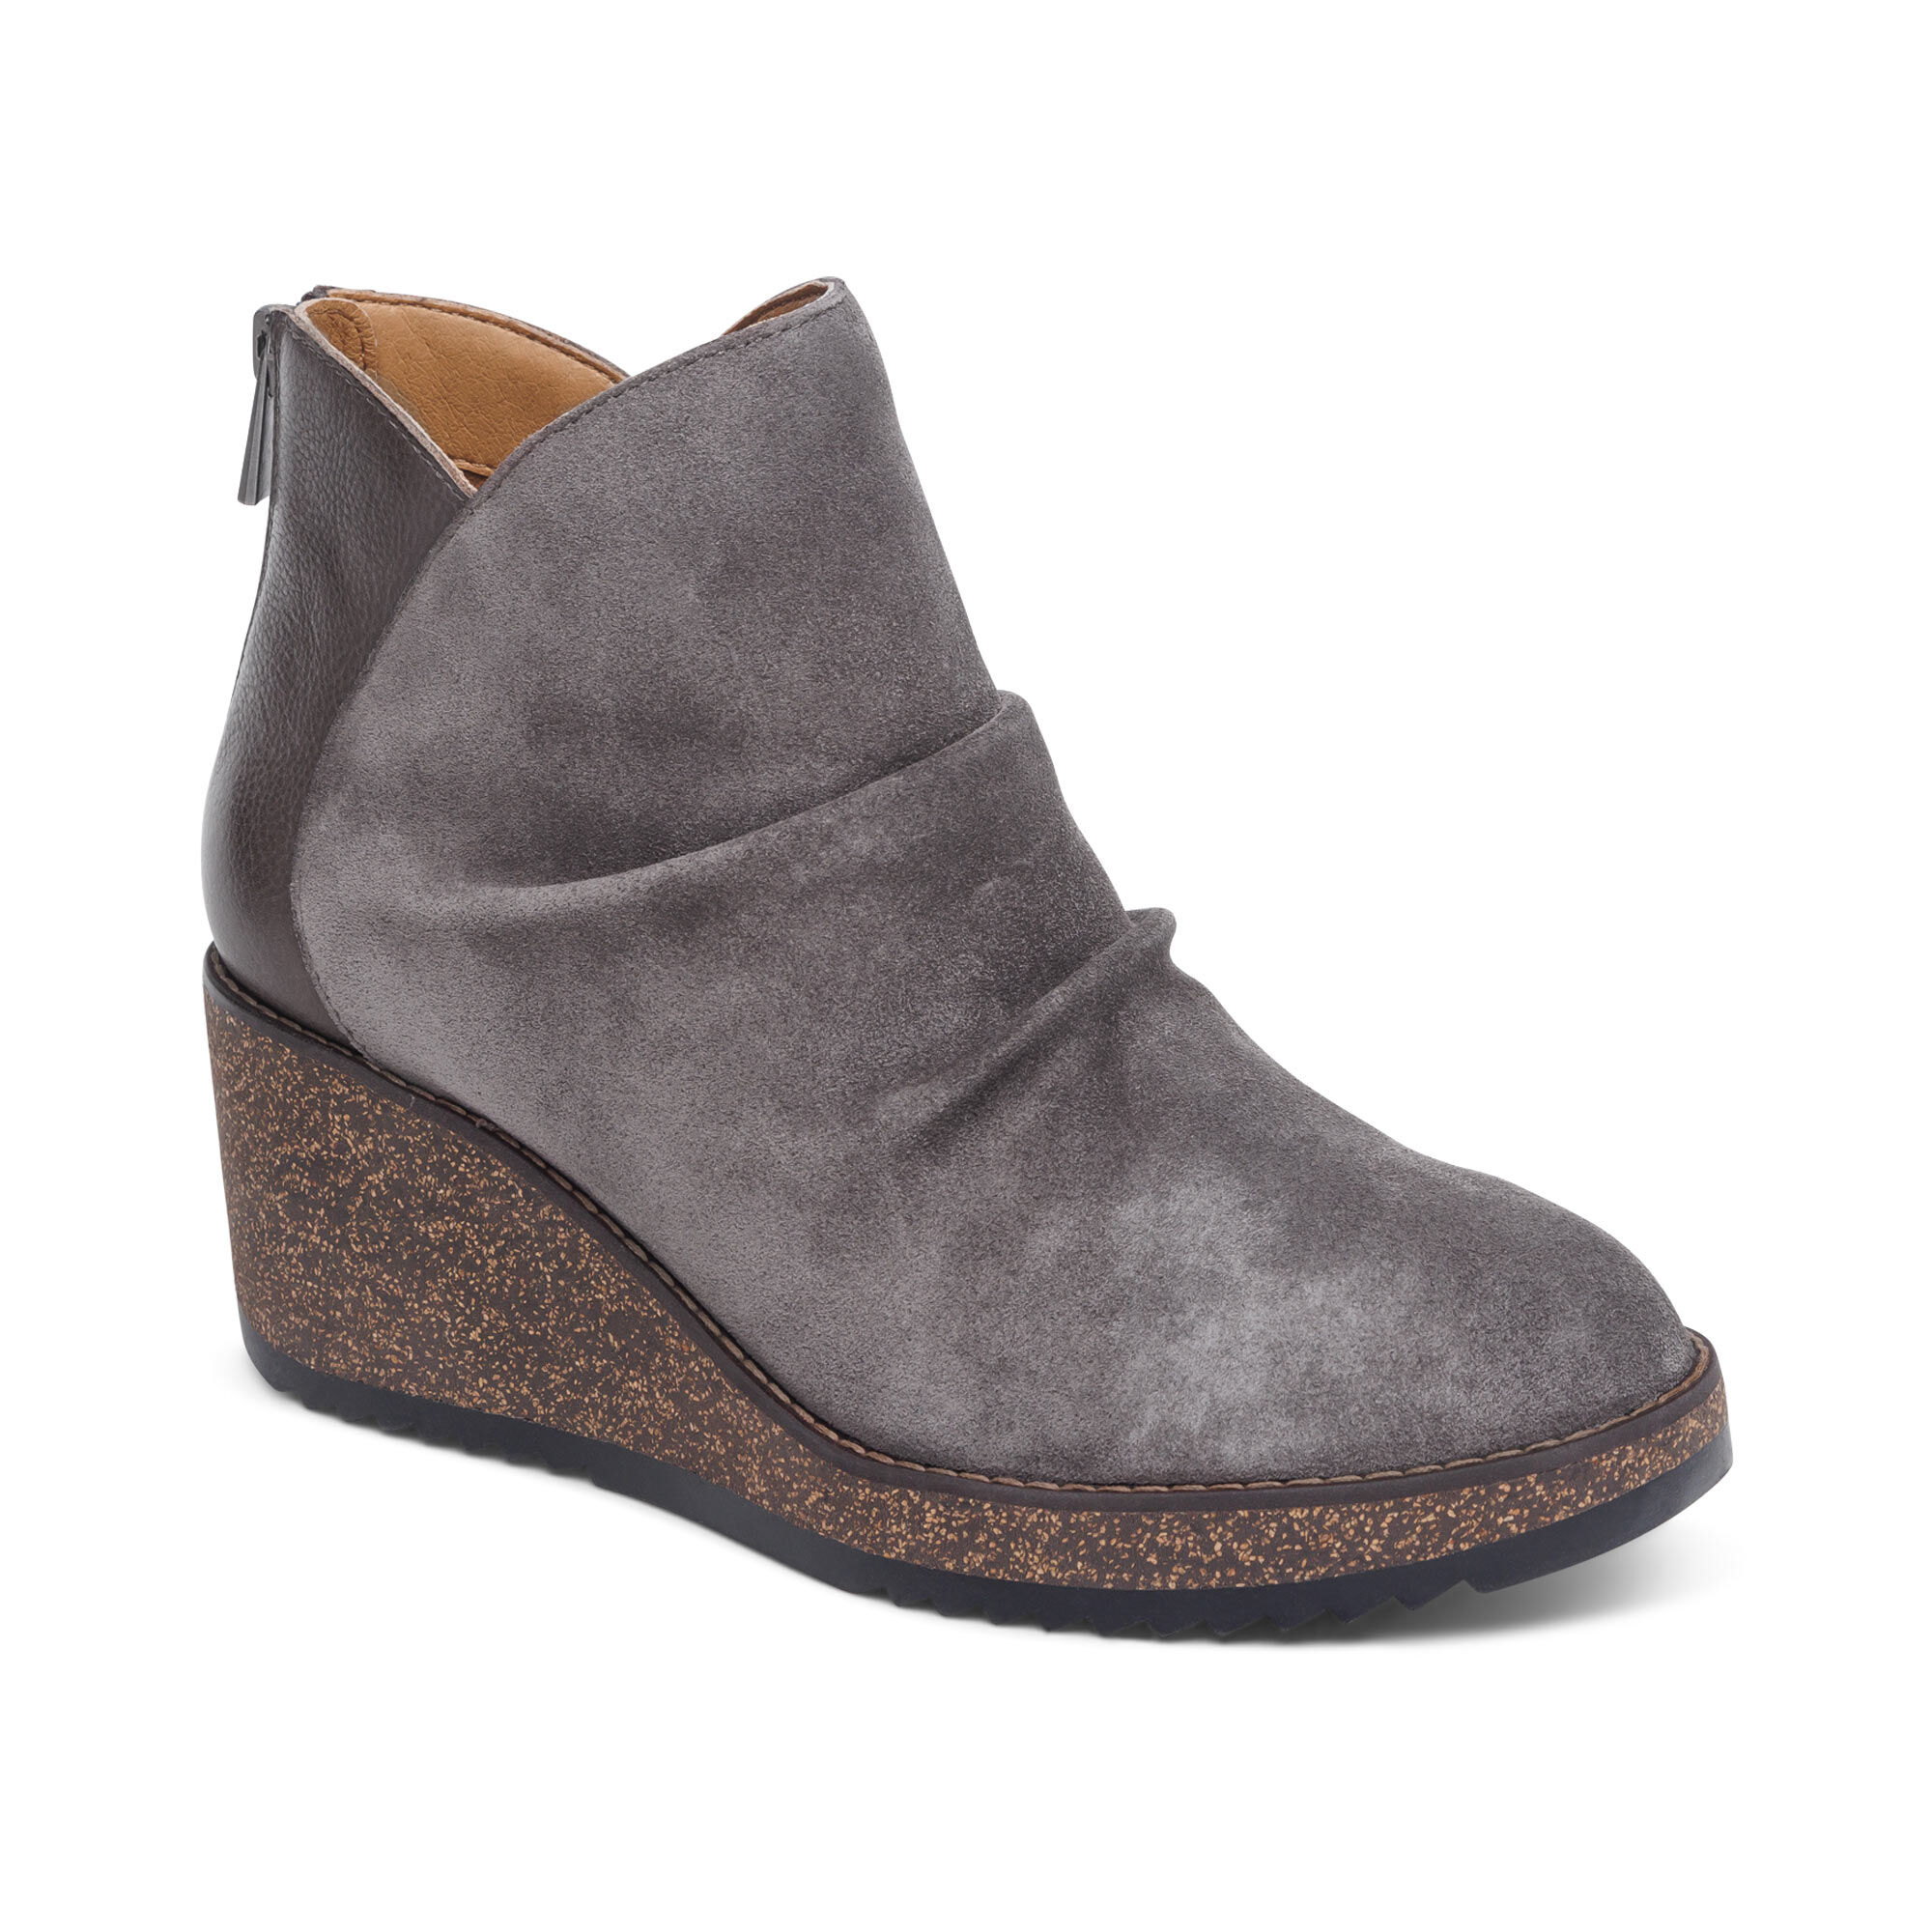 Clarks Cloudsteppers Wedge Ankle Boots Top Sellers | bellvalefarms.com